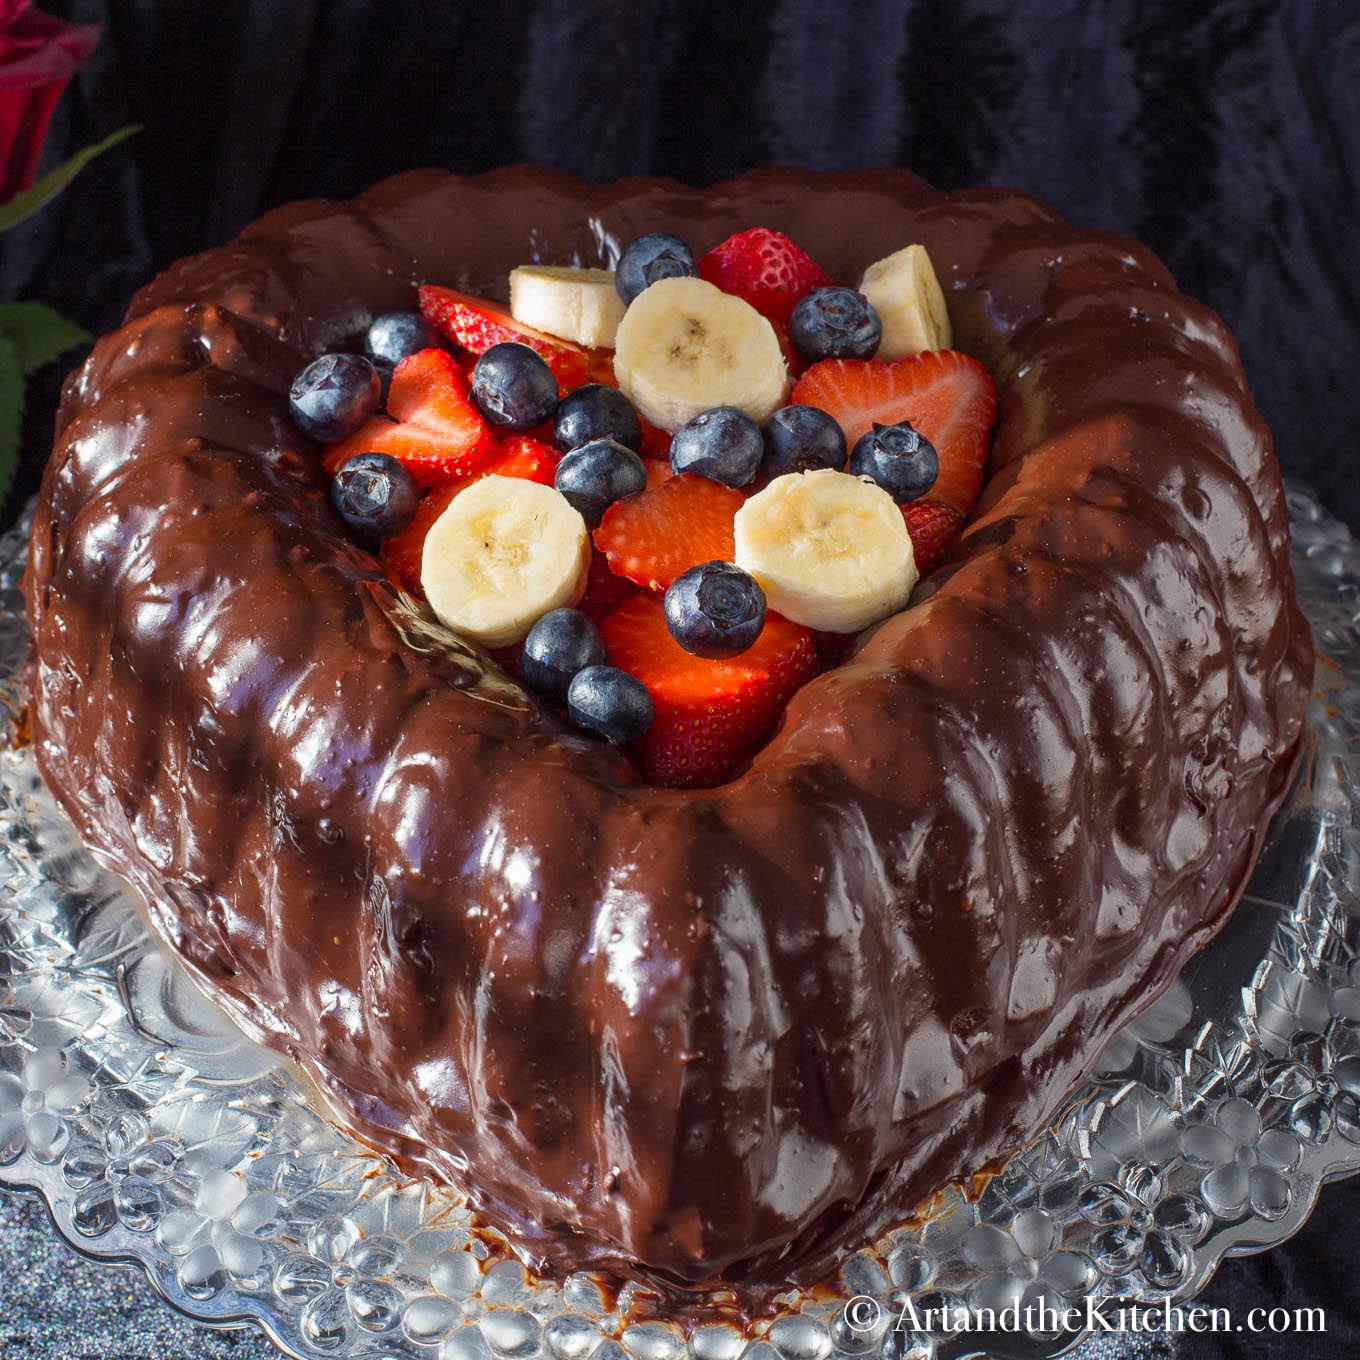 Heart shaped chocolate cake covered in chocolate ganache. Center filled with berries and banana slices.